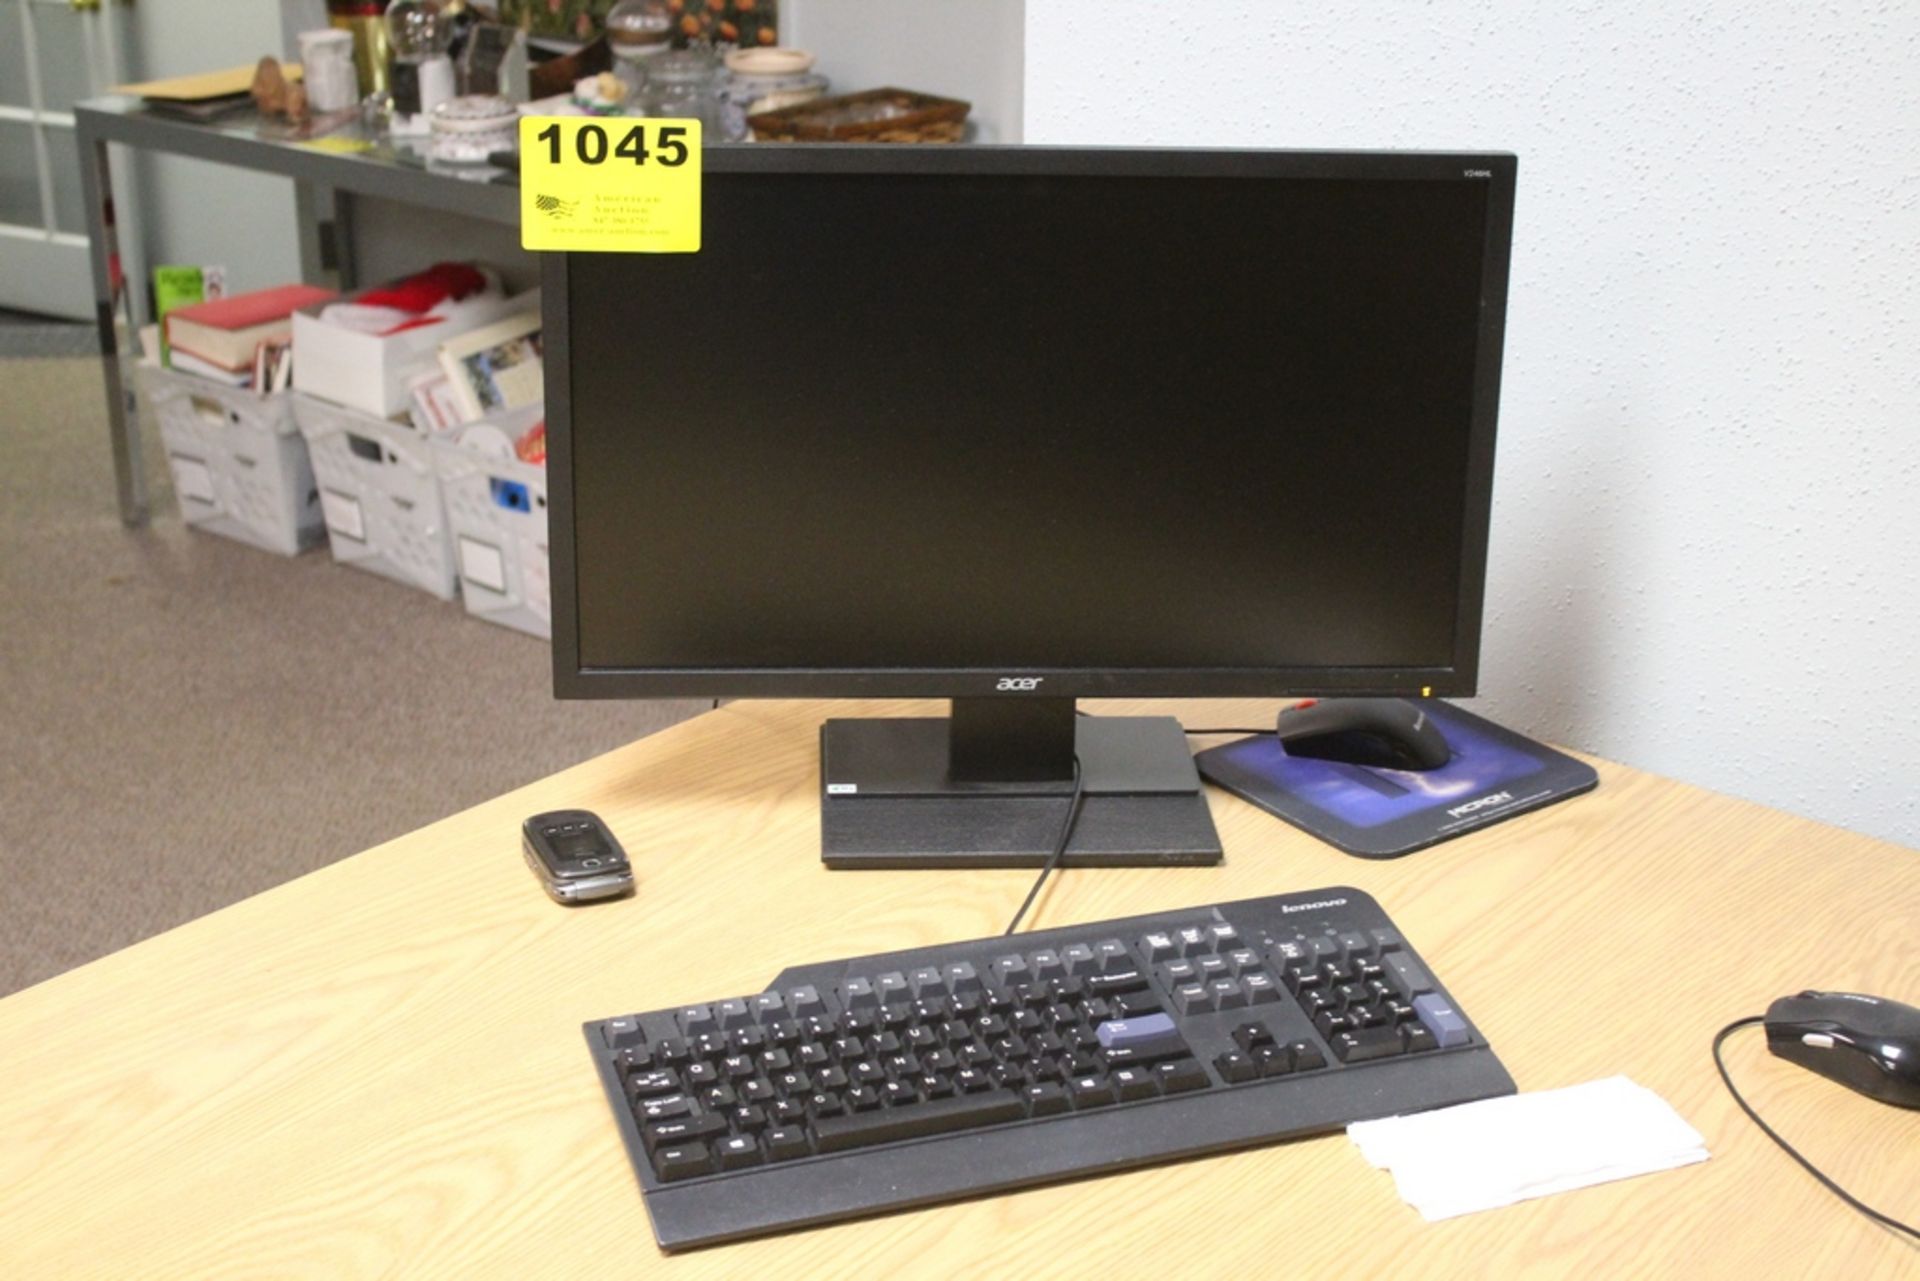 (3) ACER FLATSCREEN MONITORS WITH KEYBOARDS AND MICE